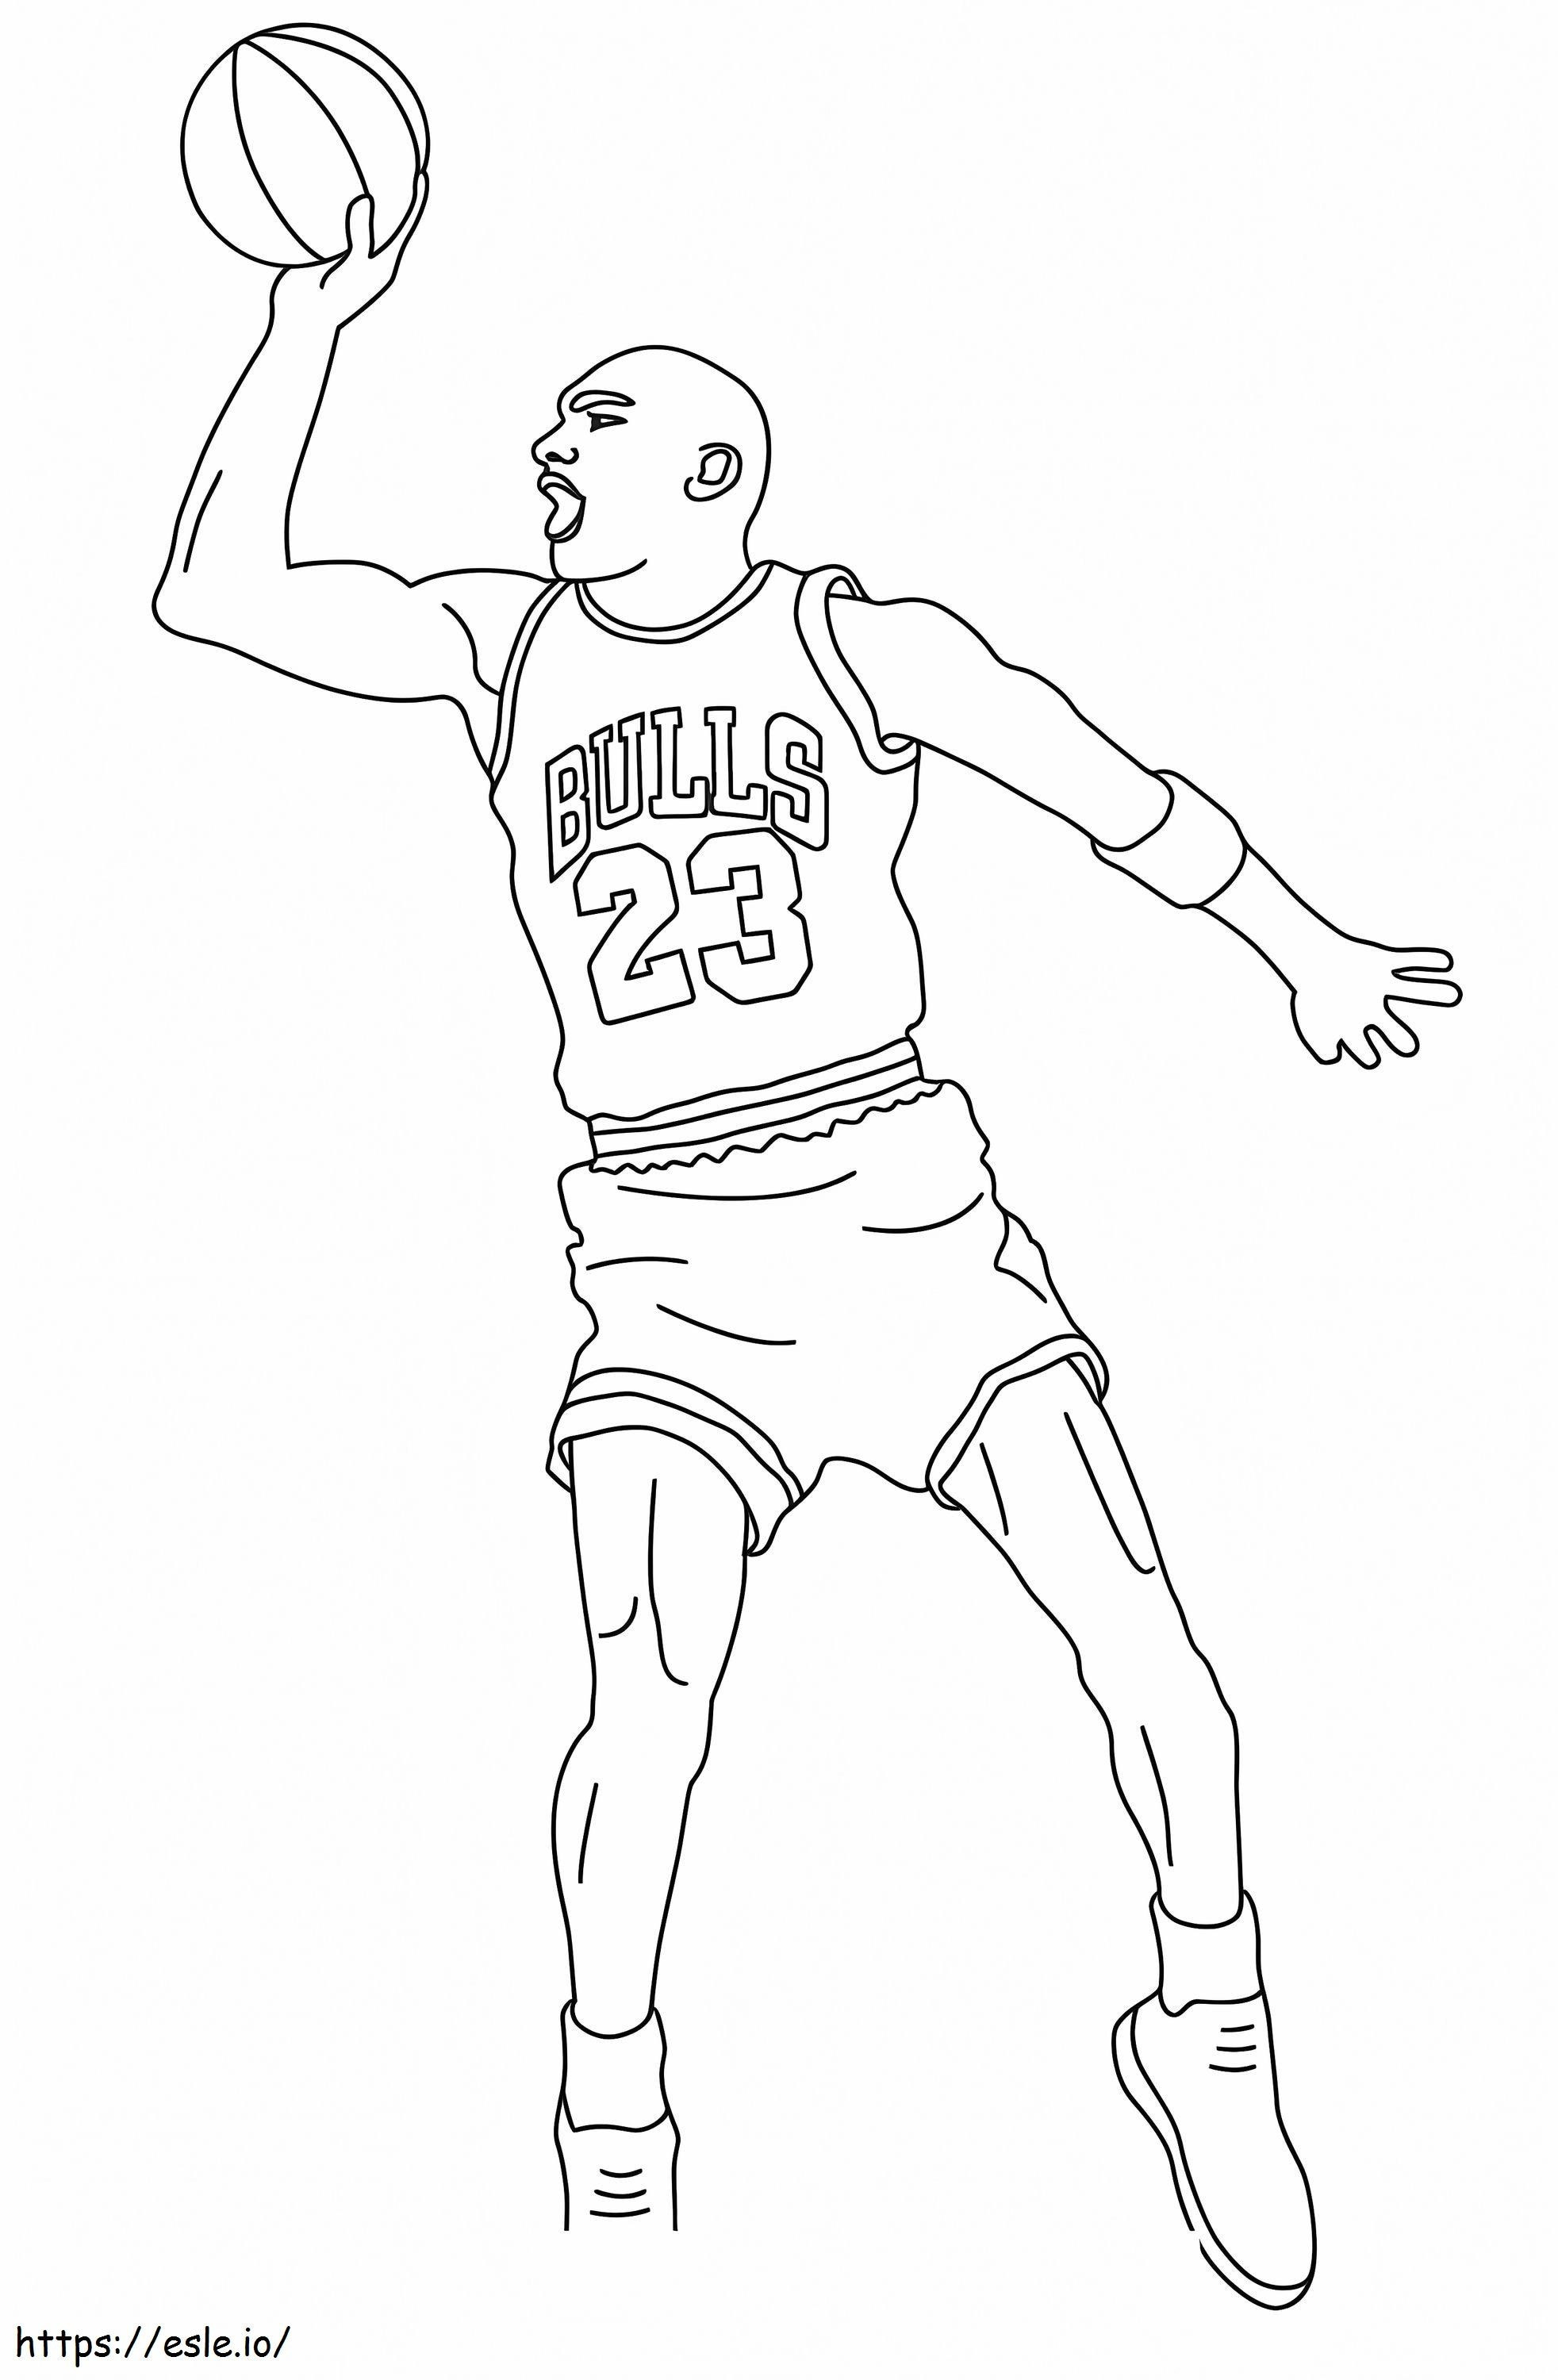 Awesome Michael Jordan coloring page